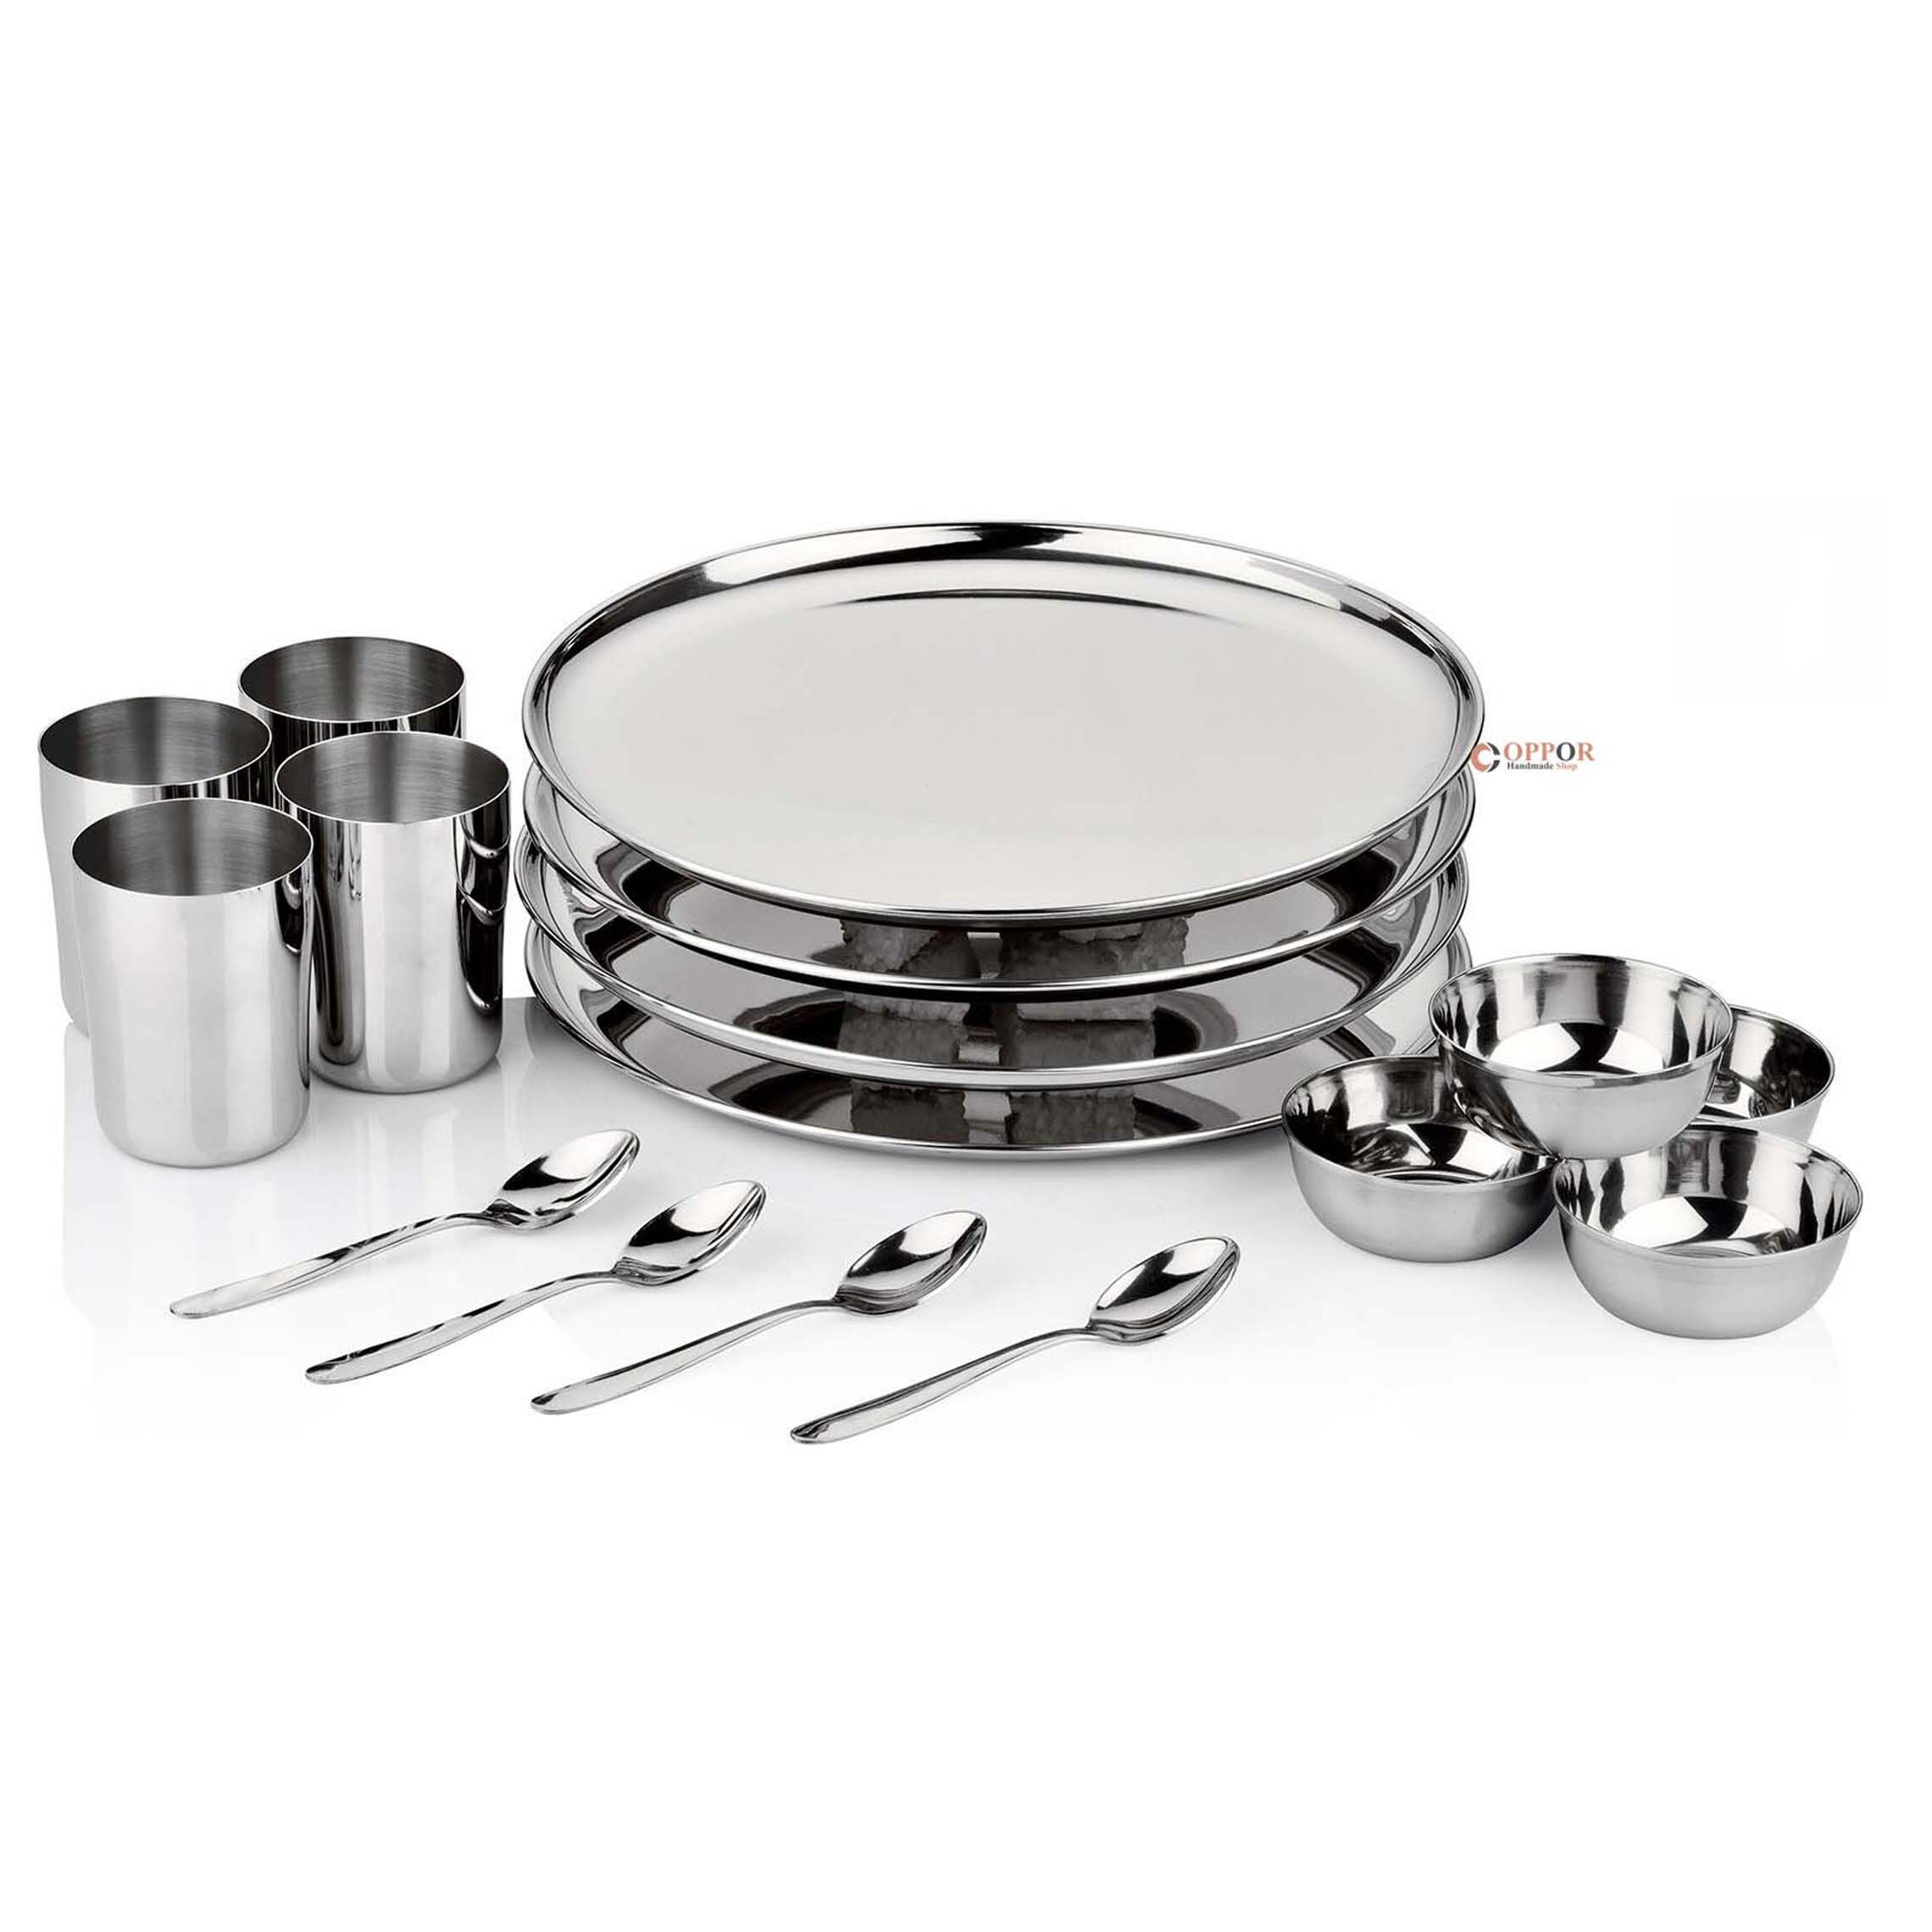 Stainless Steel Dinnerware - 16 Piece Family Pack